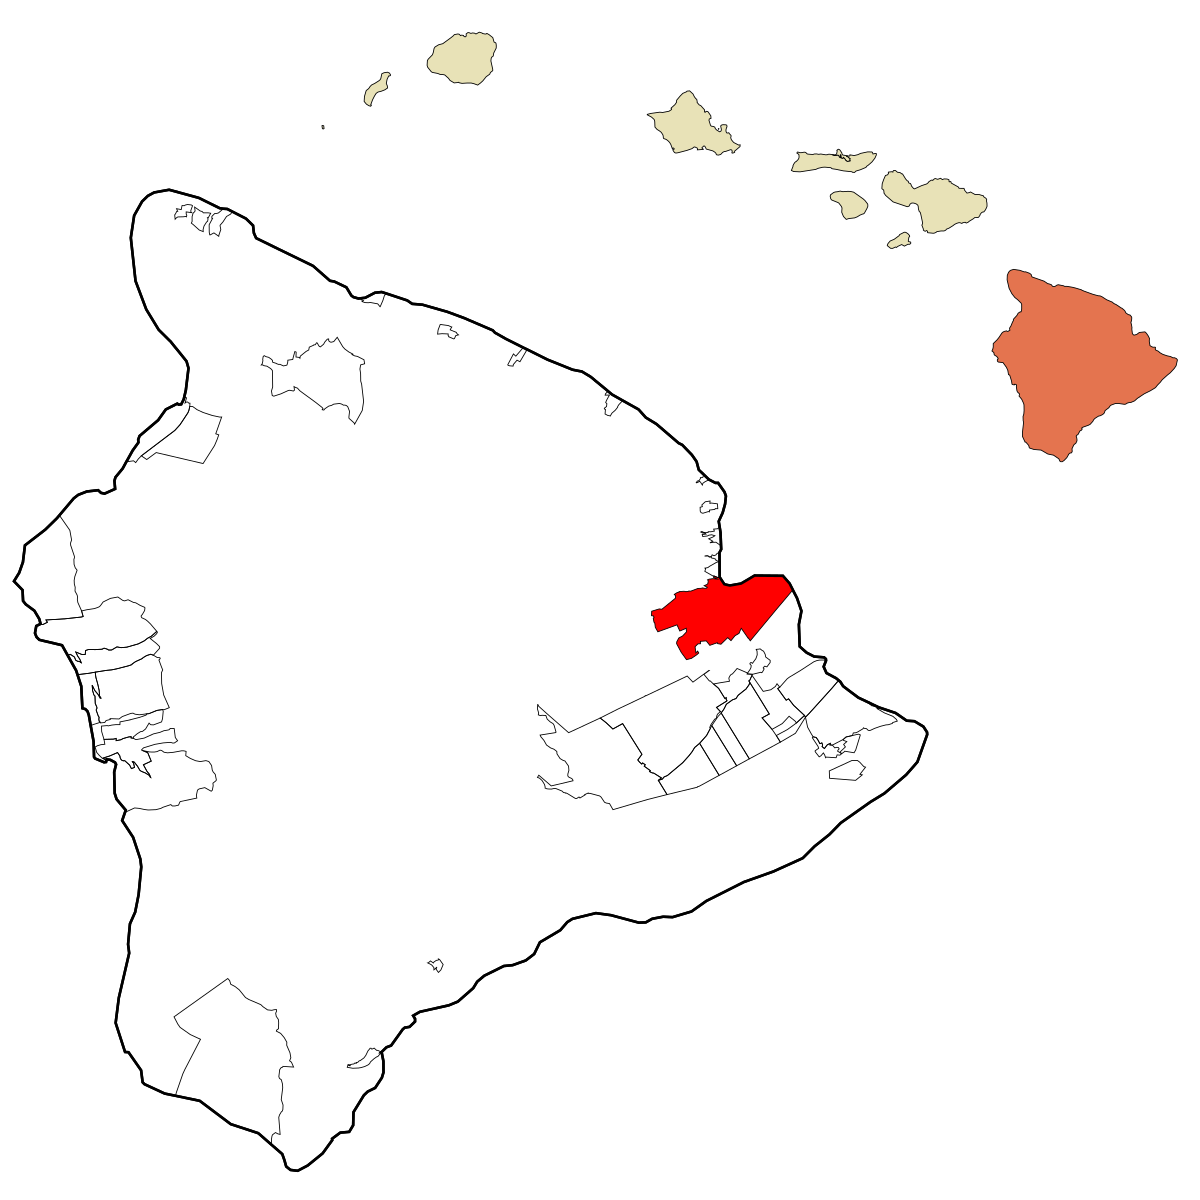 Town of Hilo Information & More